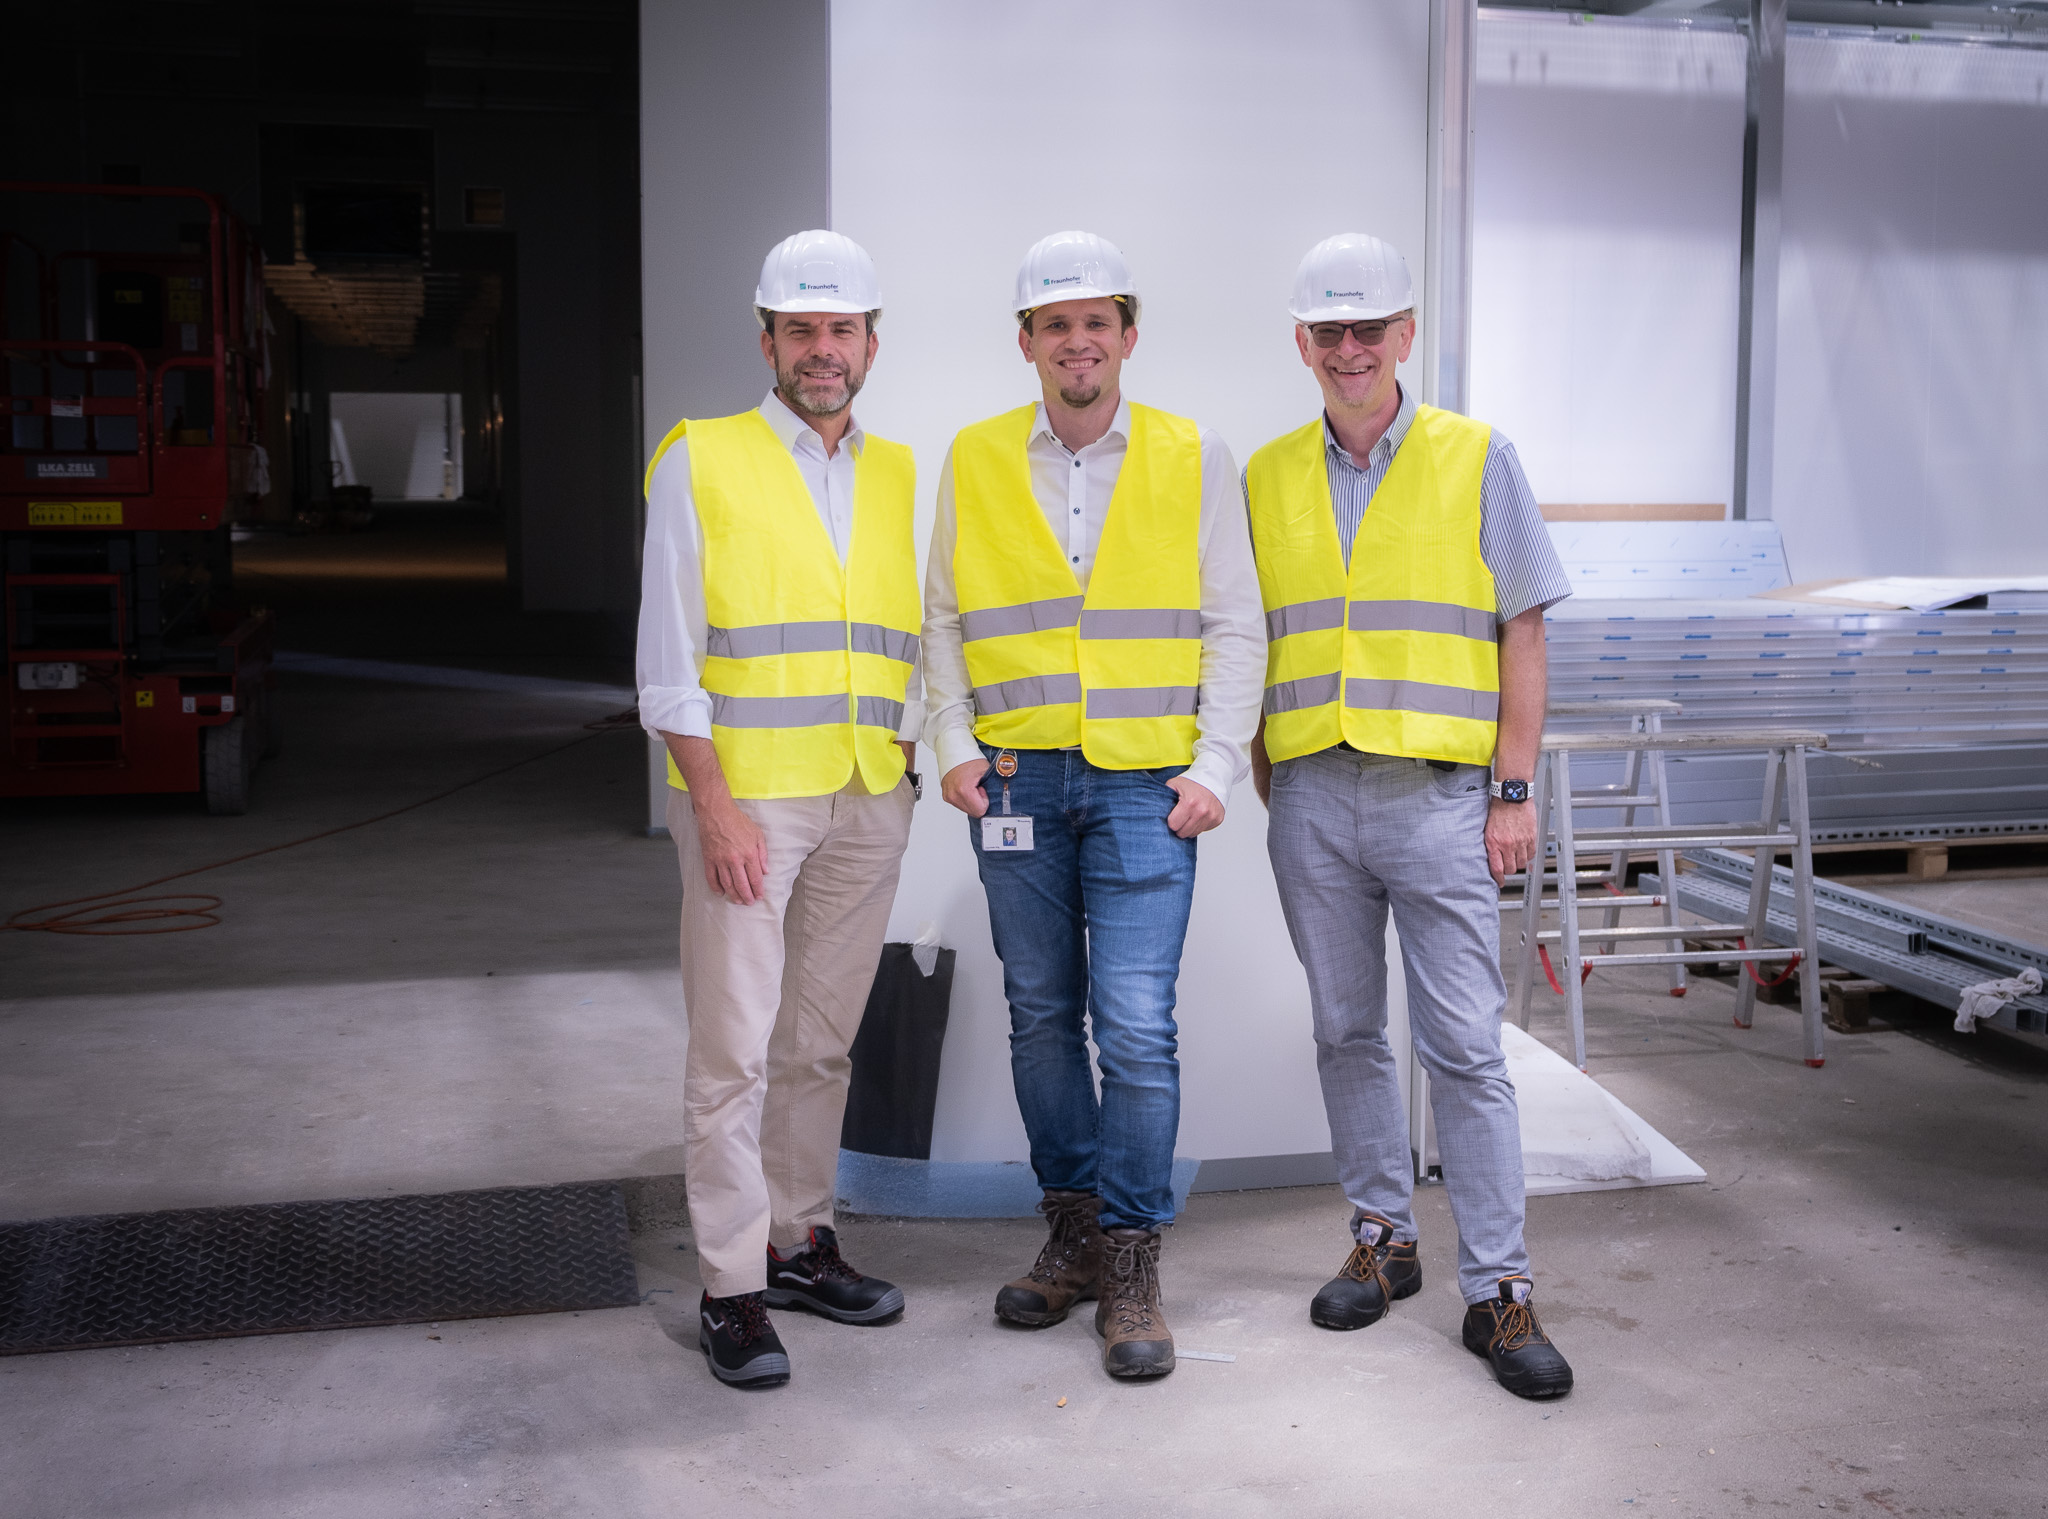 The three battery researchers Dr. Pieter Jansens, Prof. Dr. Simon Lux and Prof. Dr. Martin Winter visit the construction site of the FFB PreFab. The group photo shows them in front of the entrance to a clean and dry room.